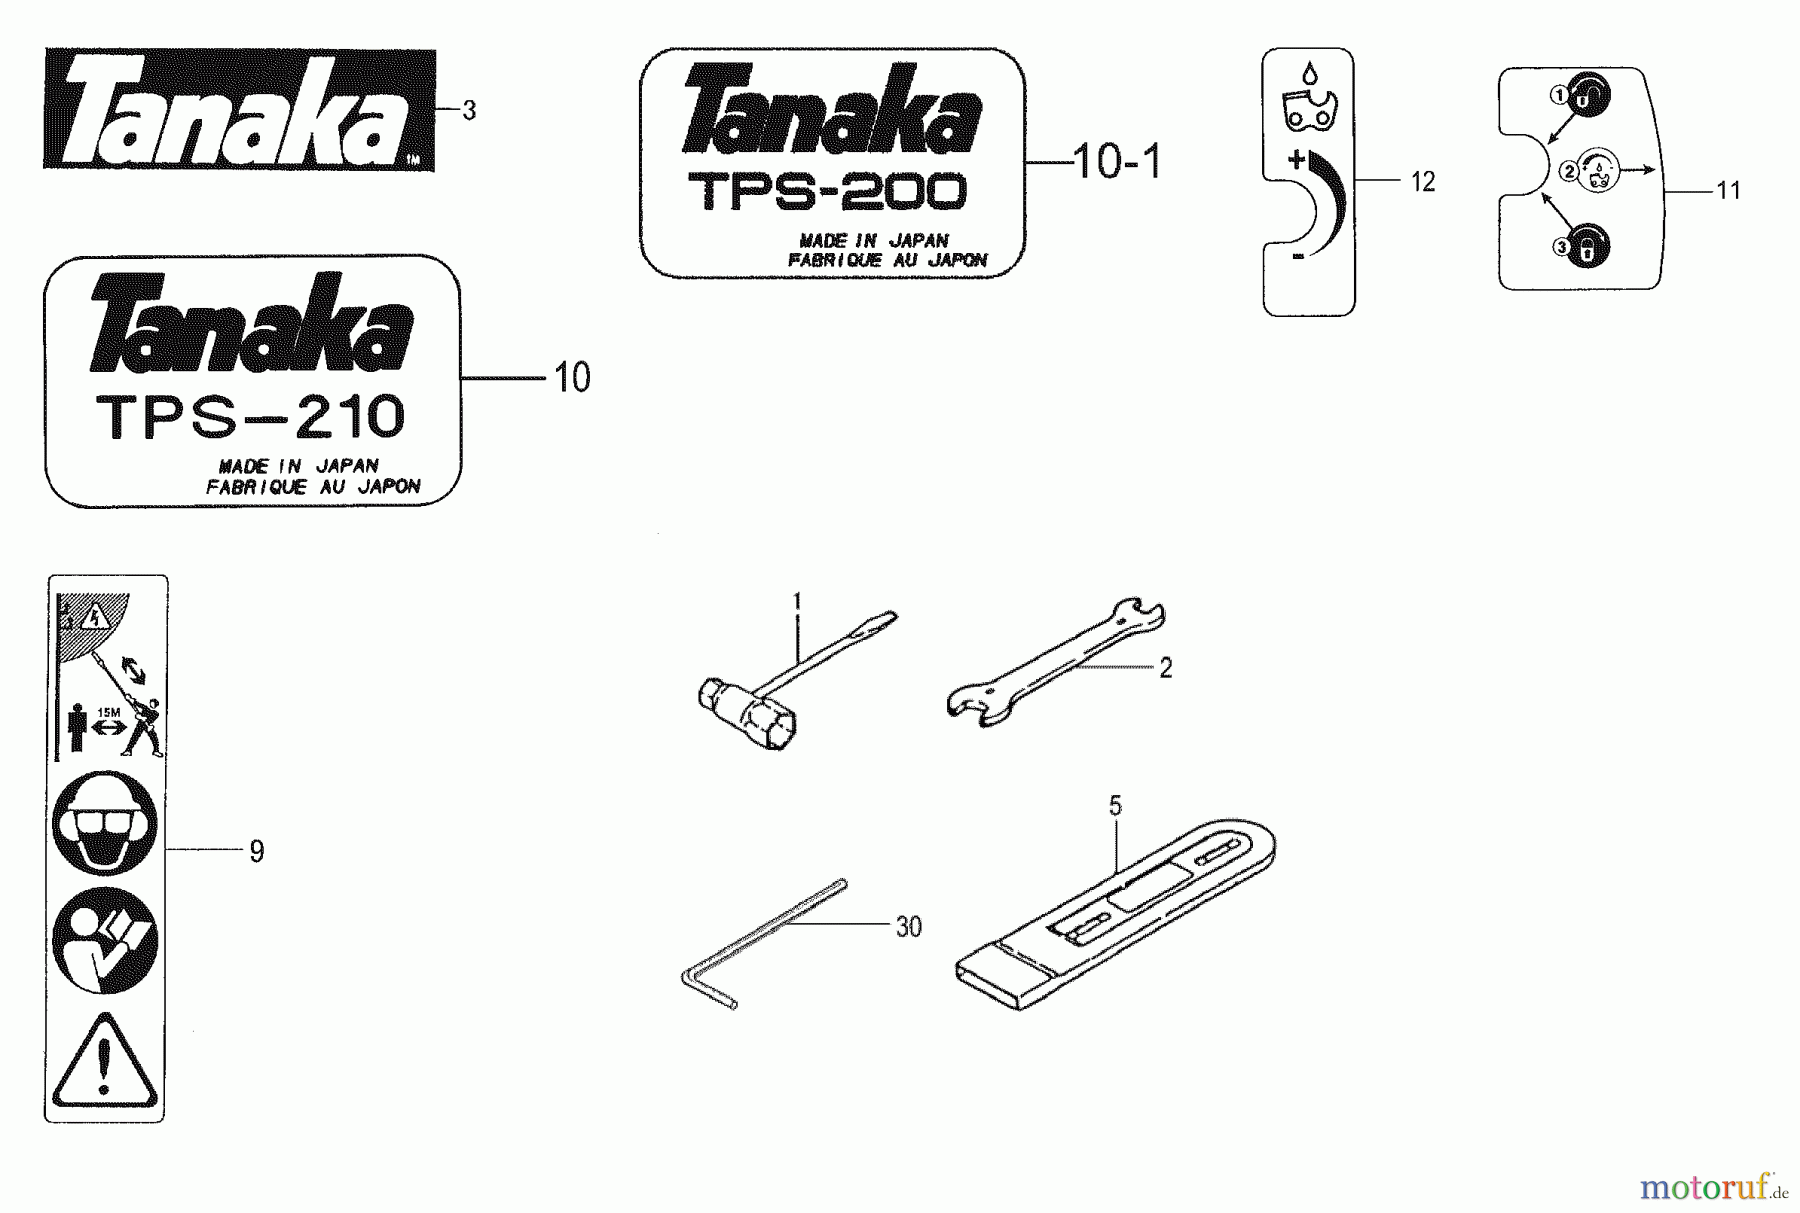  Tanaka Hochentaster TPS-2510 - Tanaka Extended Reach Pole Saw Tools & Decals